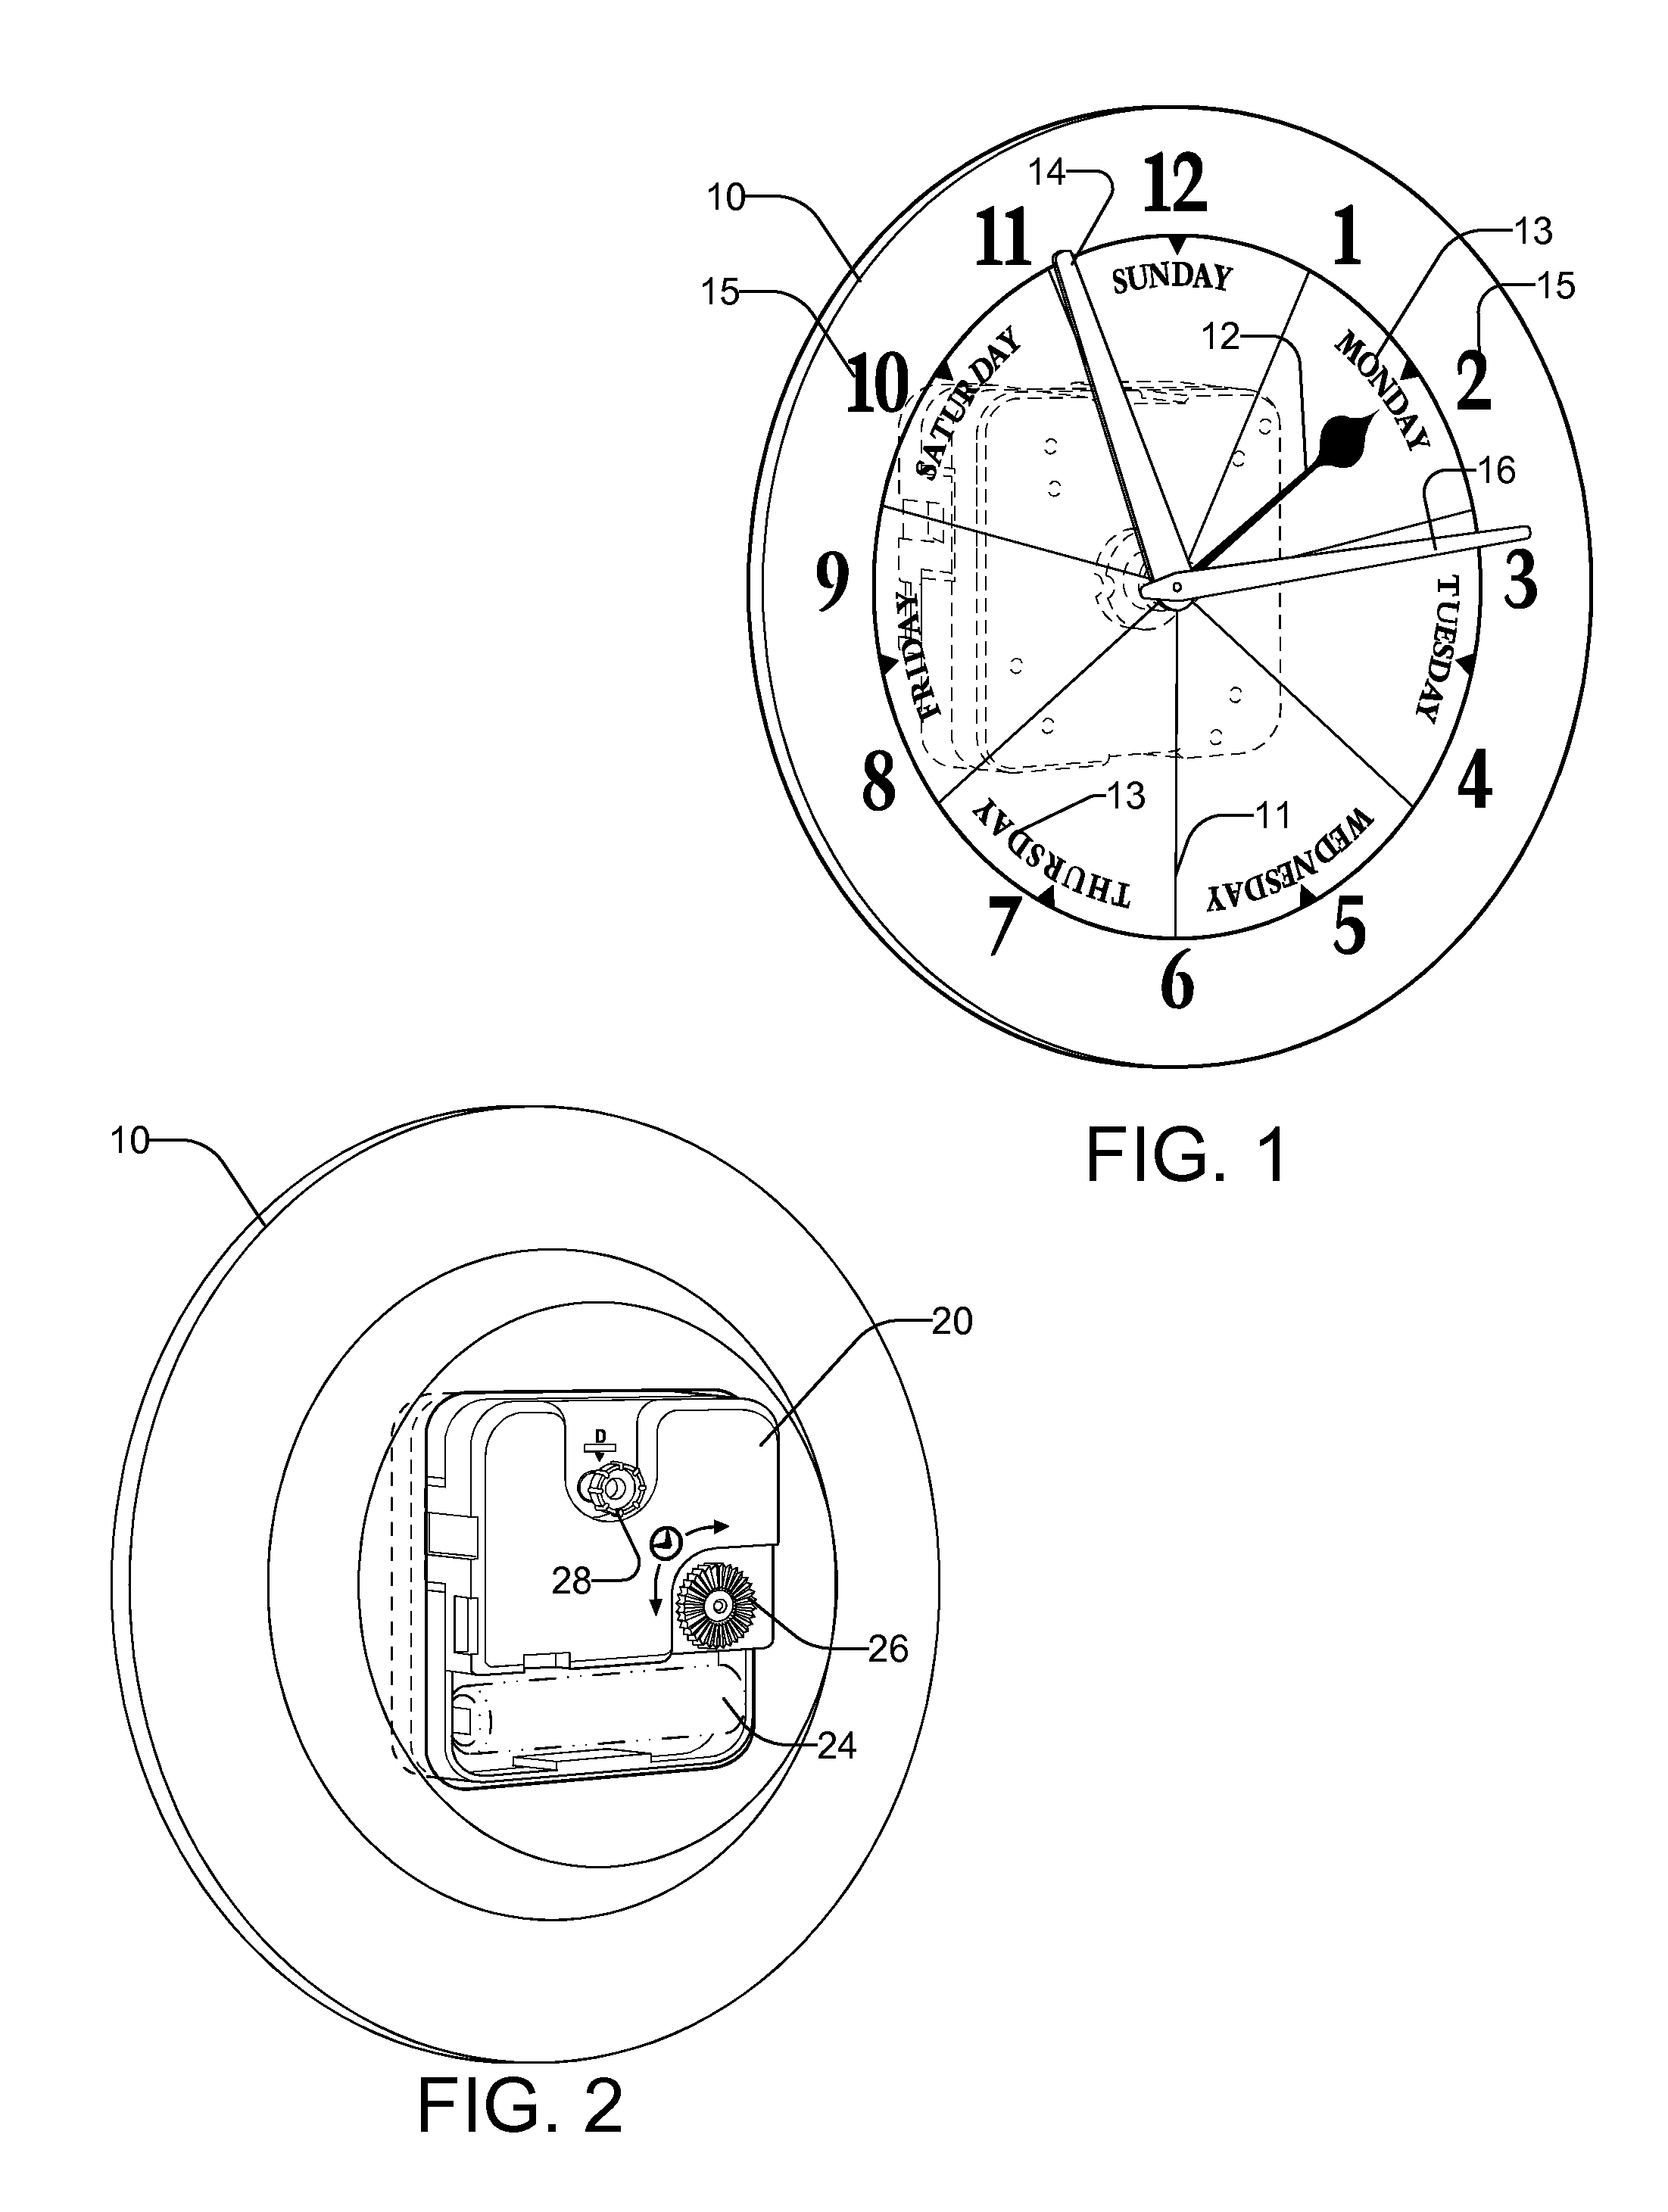 Day and time chronometer movement